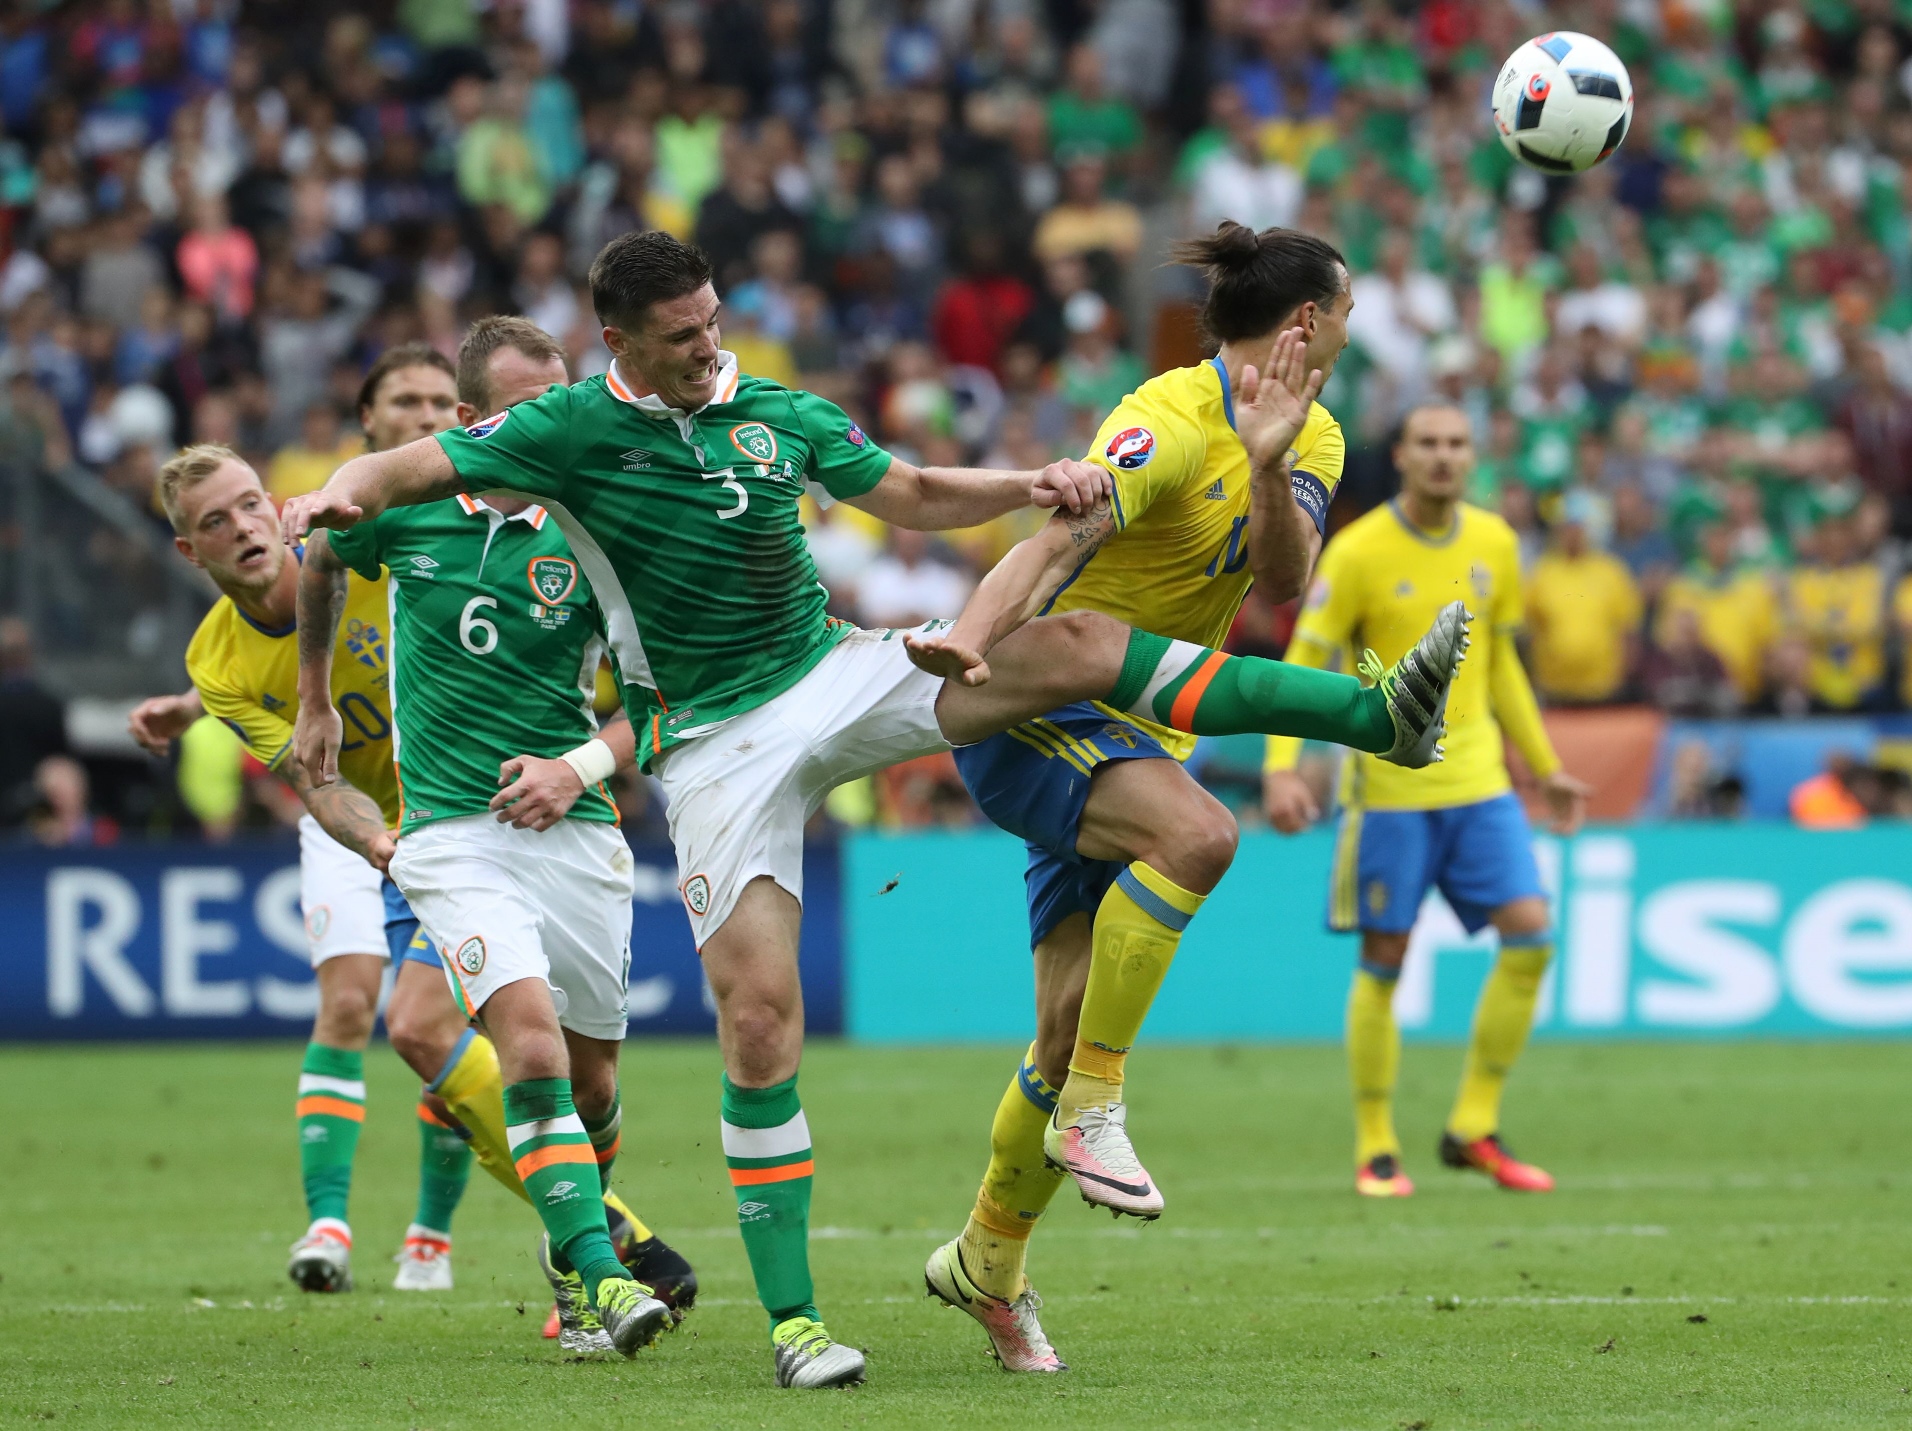 ireland 039 s defender ciaran clark 3rd l vies for the ball with sweden 039 s forward zlatan ibrahimovic during the euro 2016 group e football match between ireland and sweden at the stade de france stadium in saint denis near paris on june 13 2016 photo afp